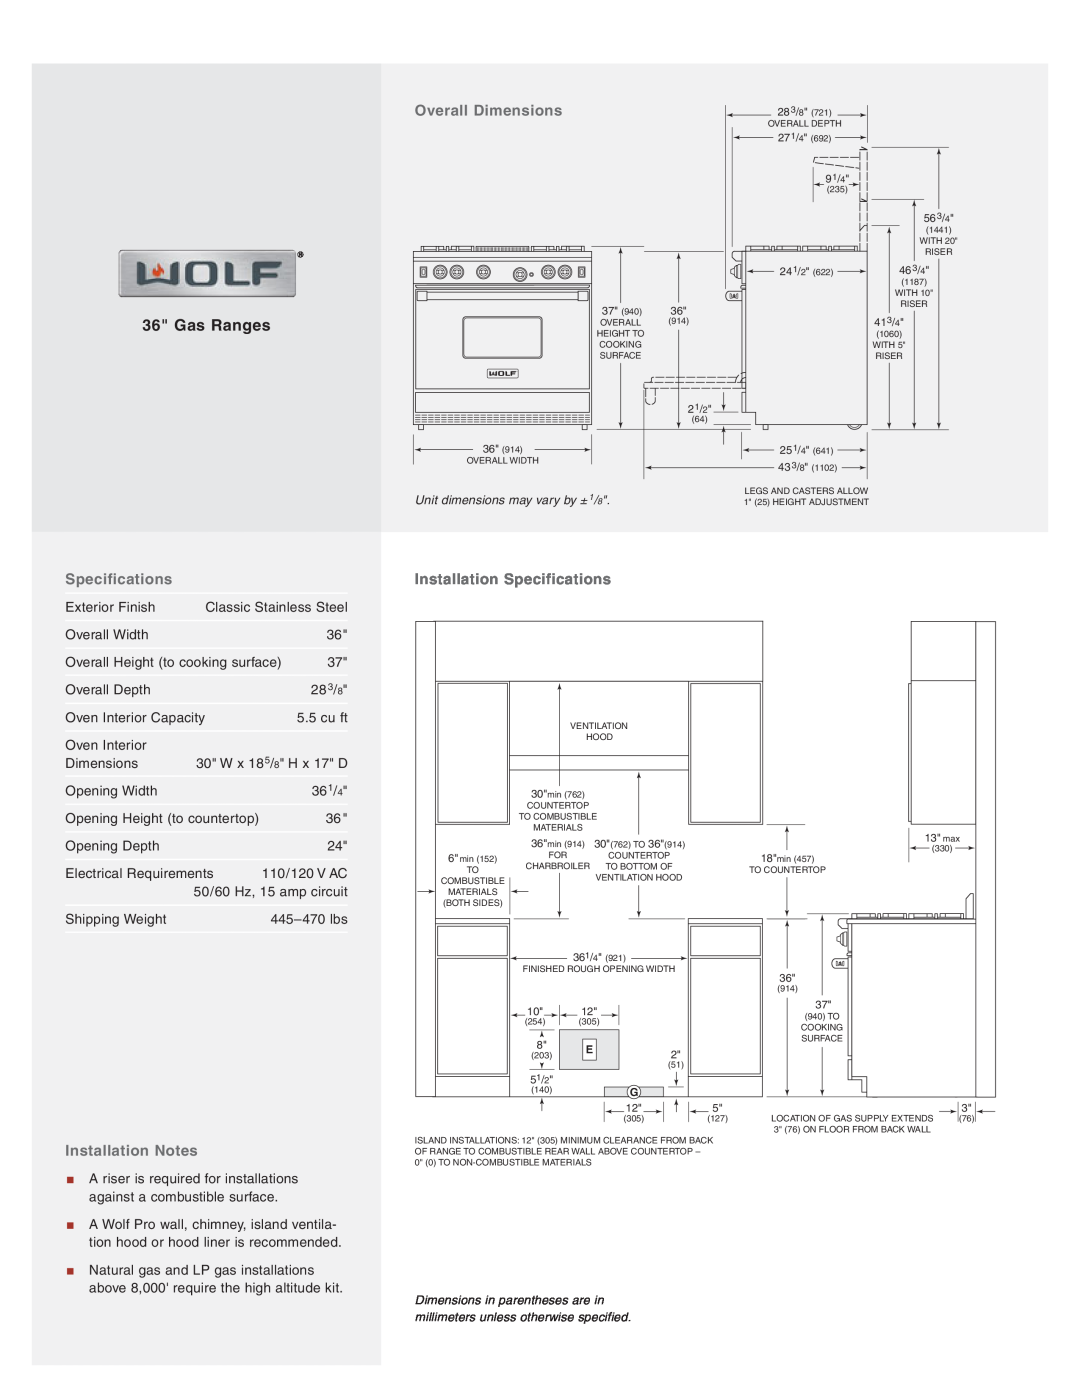 Wolf Appliance Company R364C, R366 Overall Dimensions, Installation Notes, Installation Specifications, Gas Ranges 